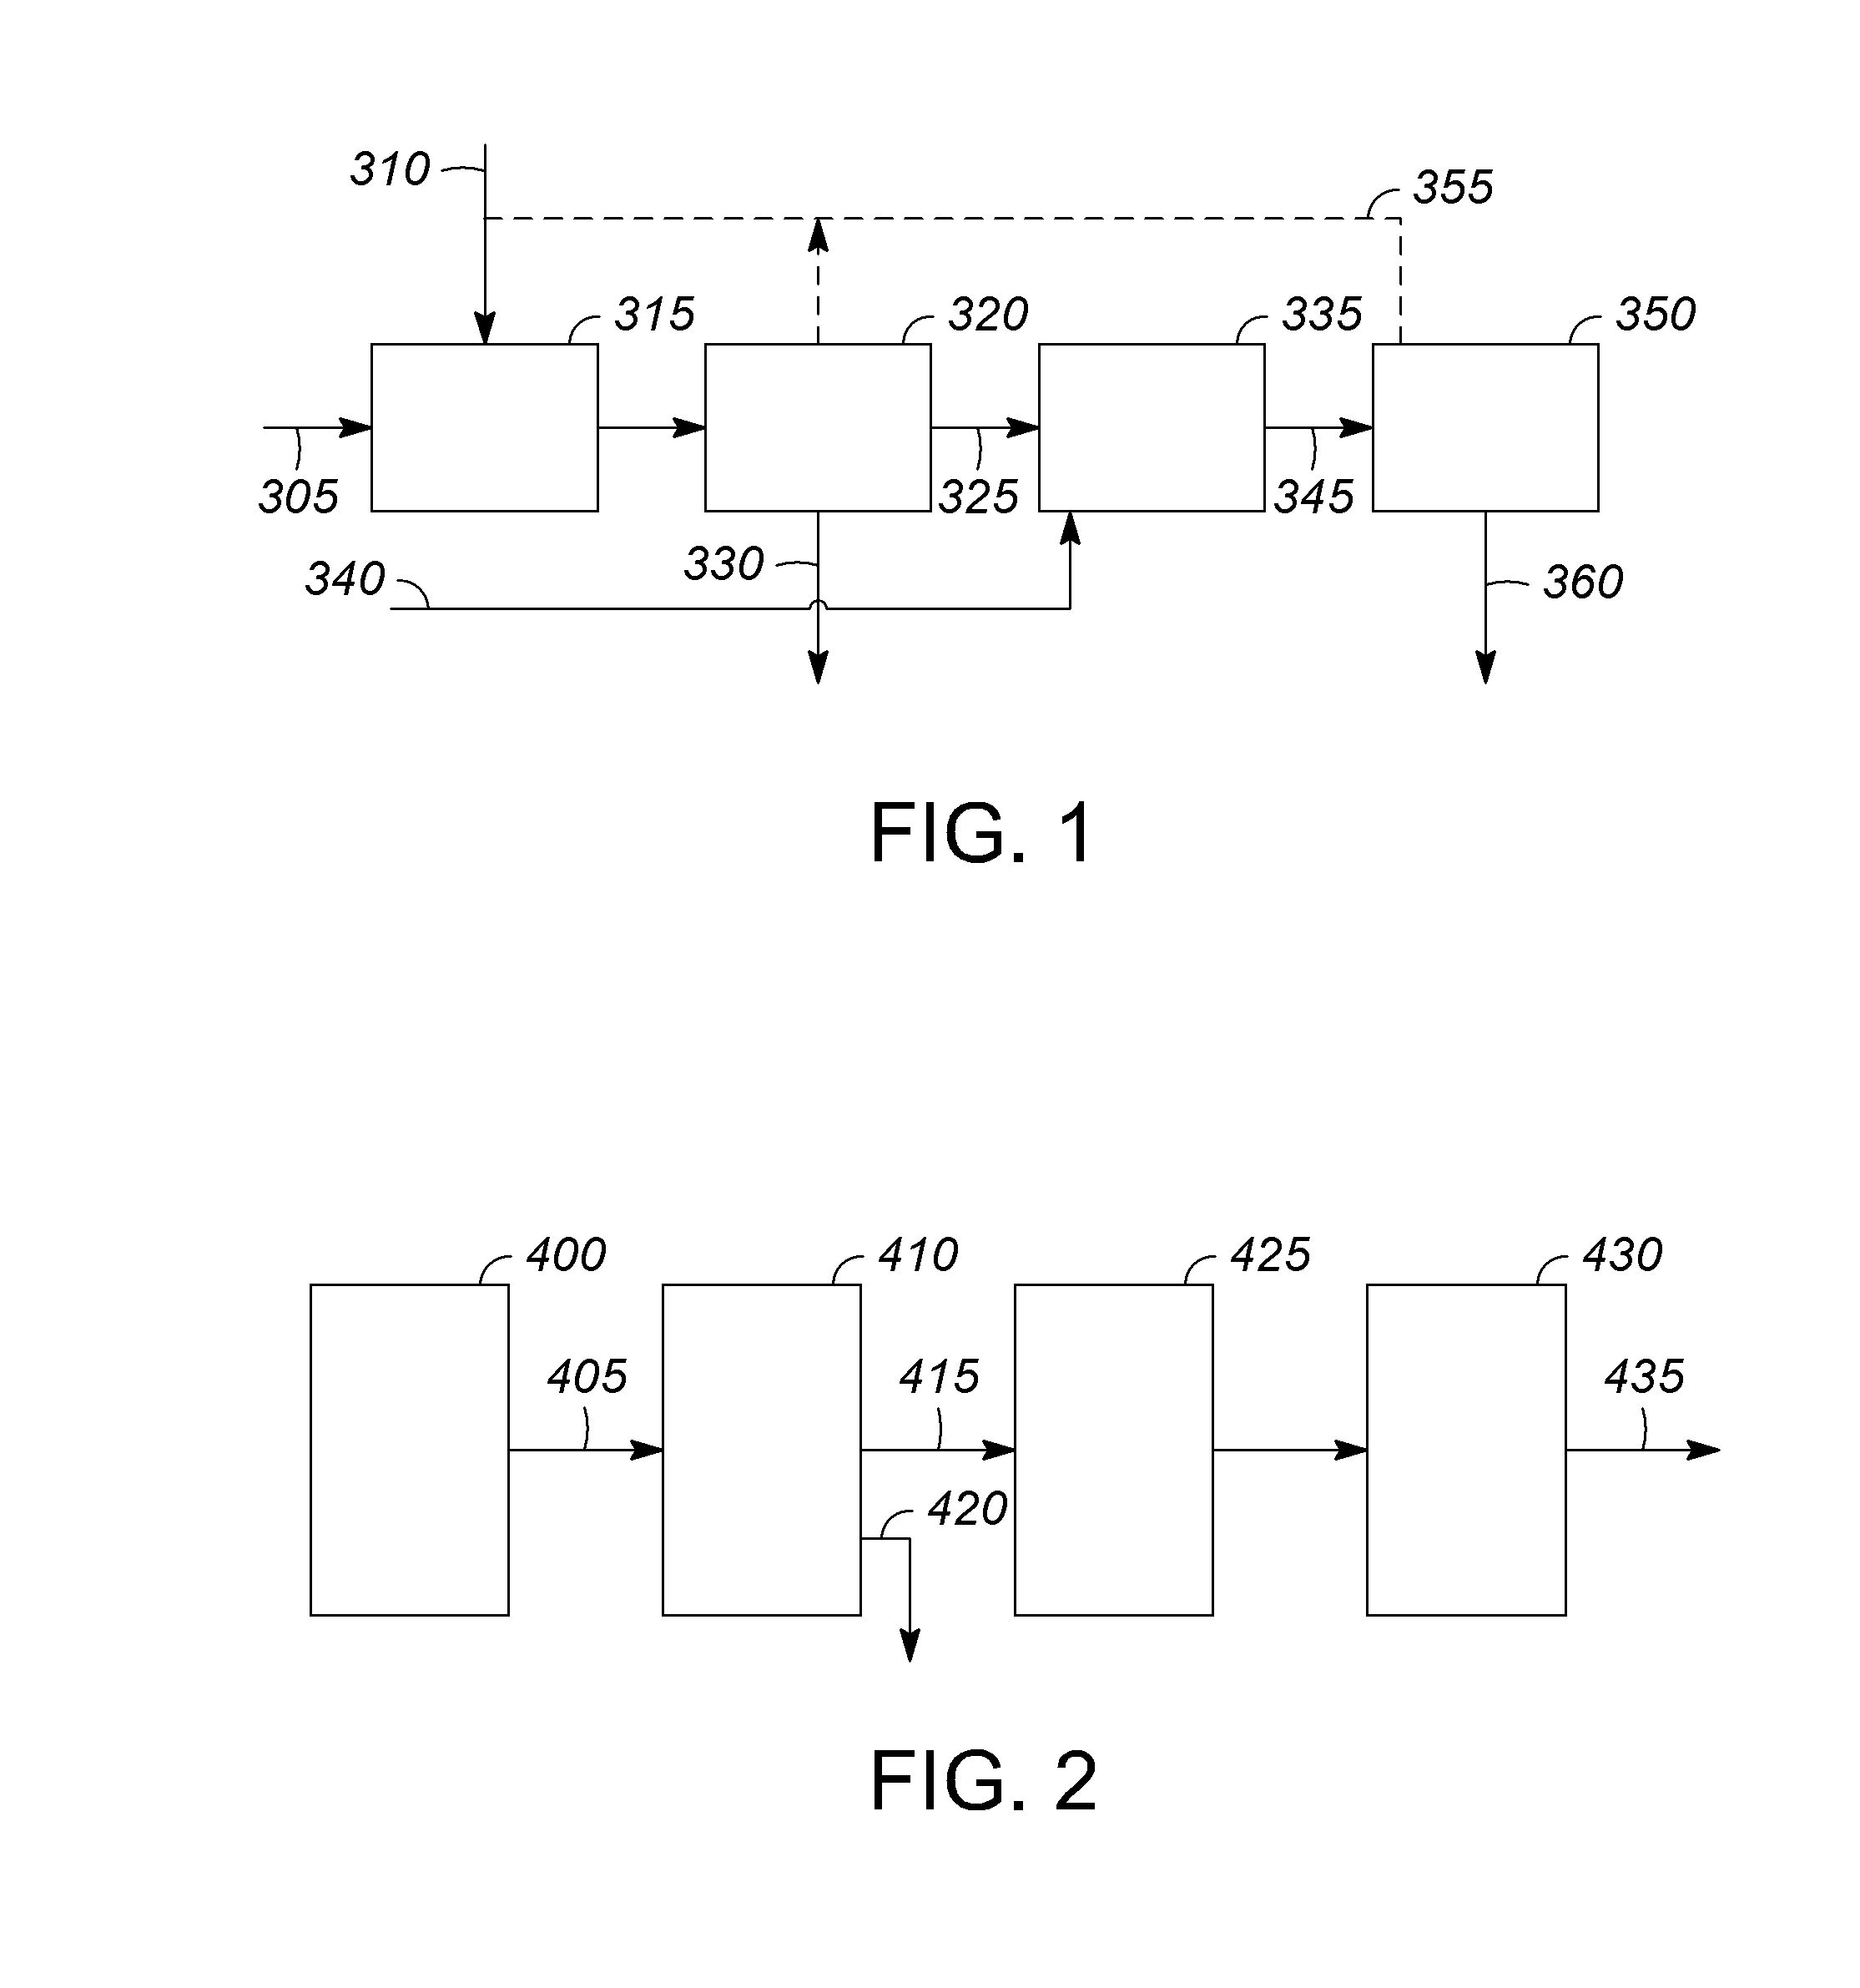 Integrated hydrolysis/hydroprocessing process for converting feedstocks containing renewable glycerides to paraffins